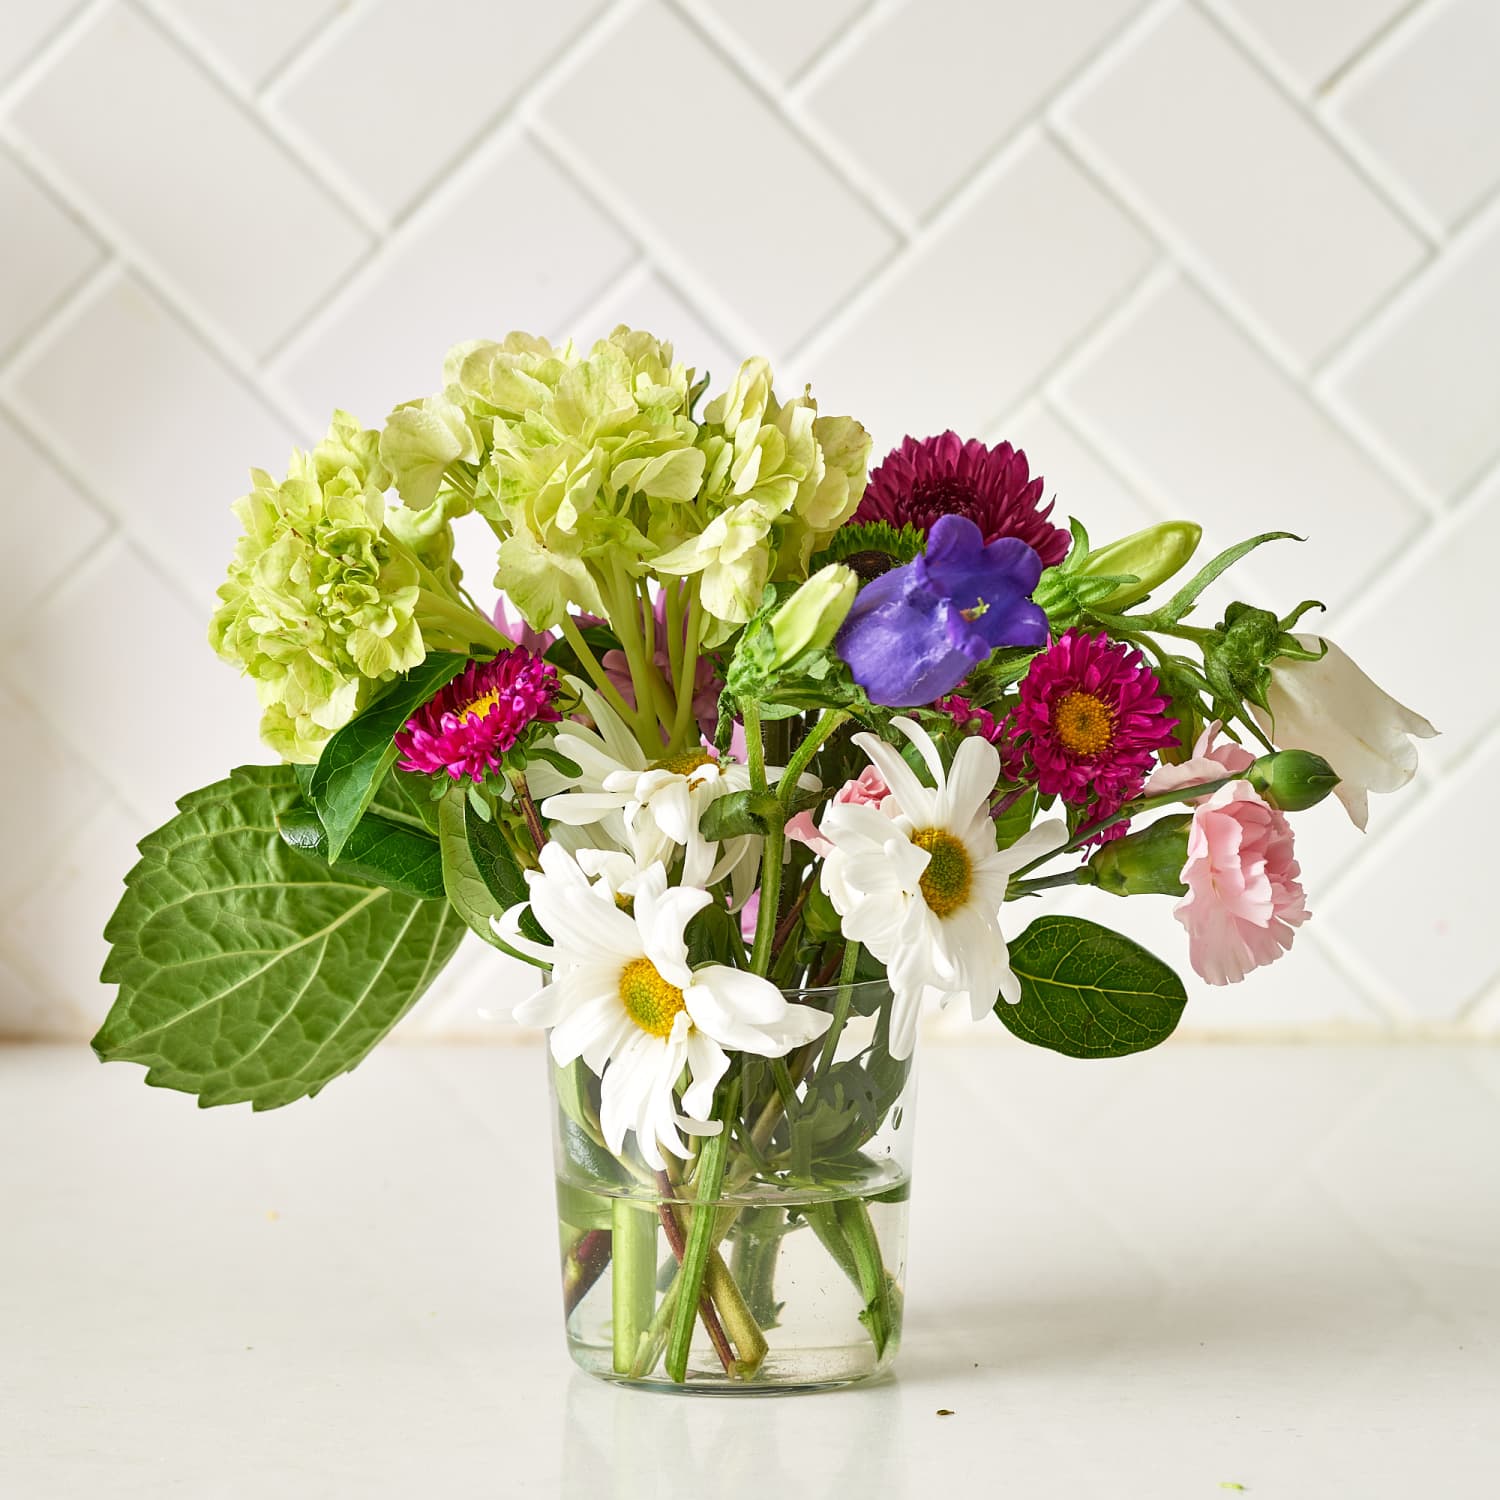 How to Preserve Flowers with Hairspray (Step-by-Step Guide)